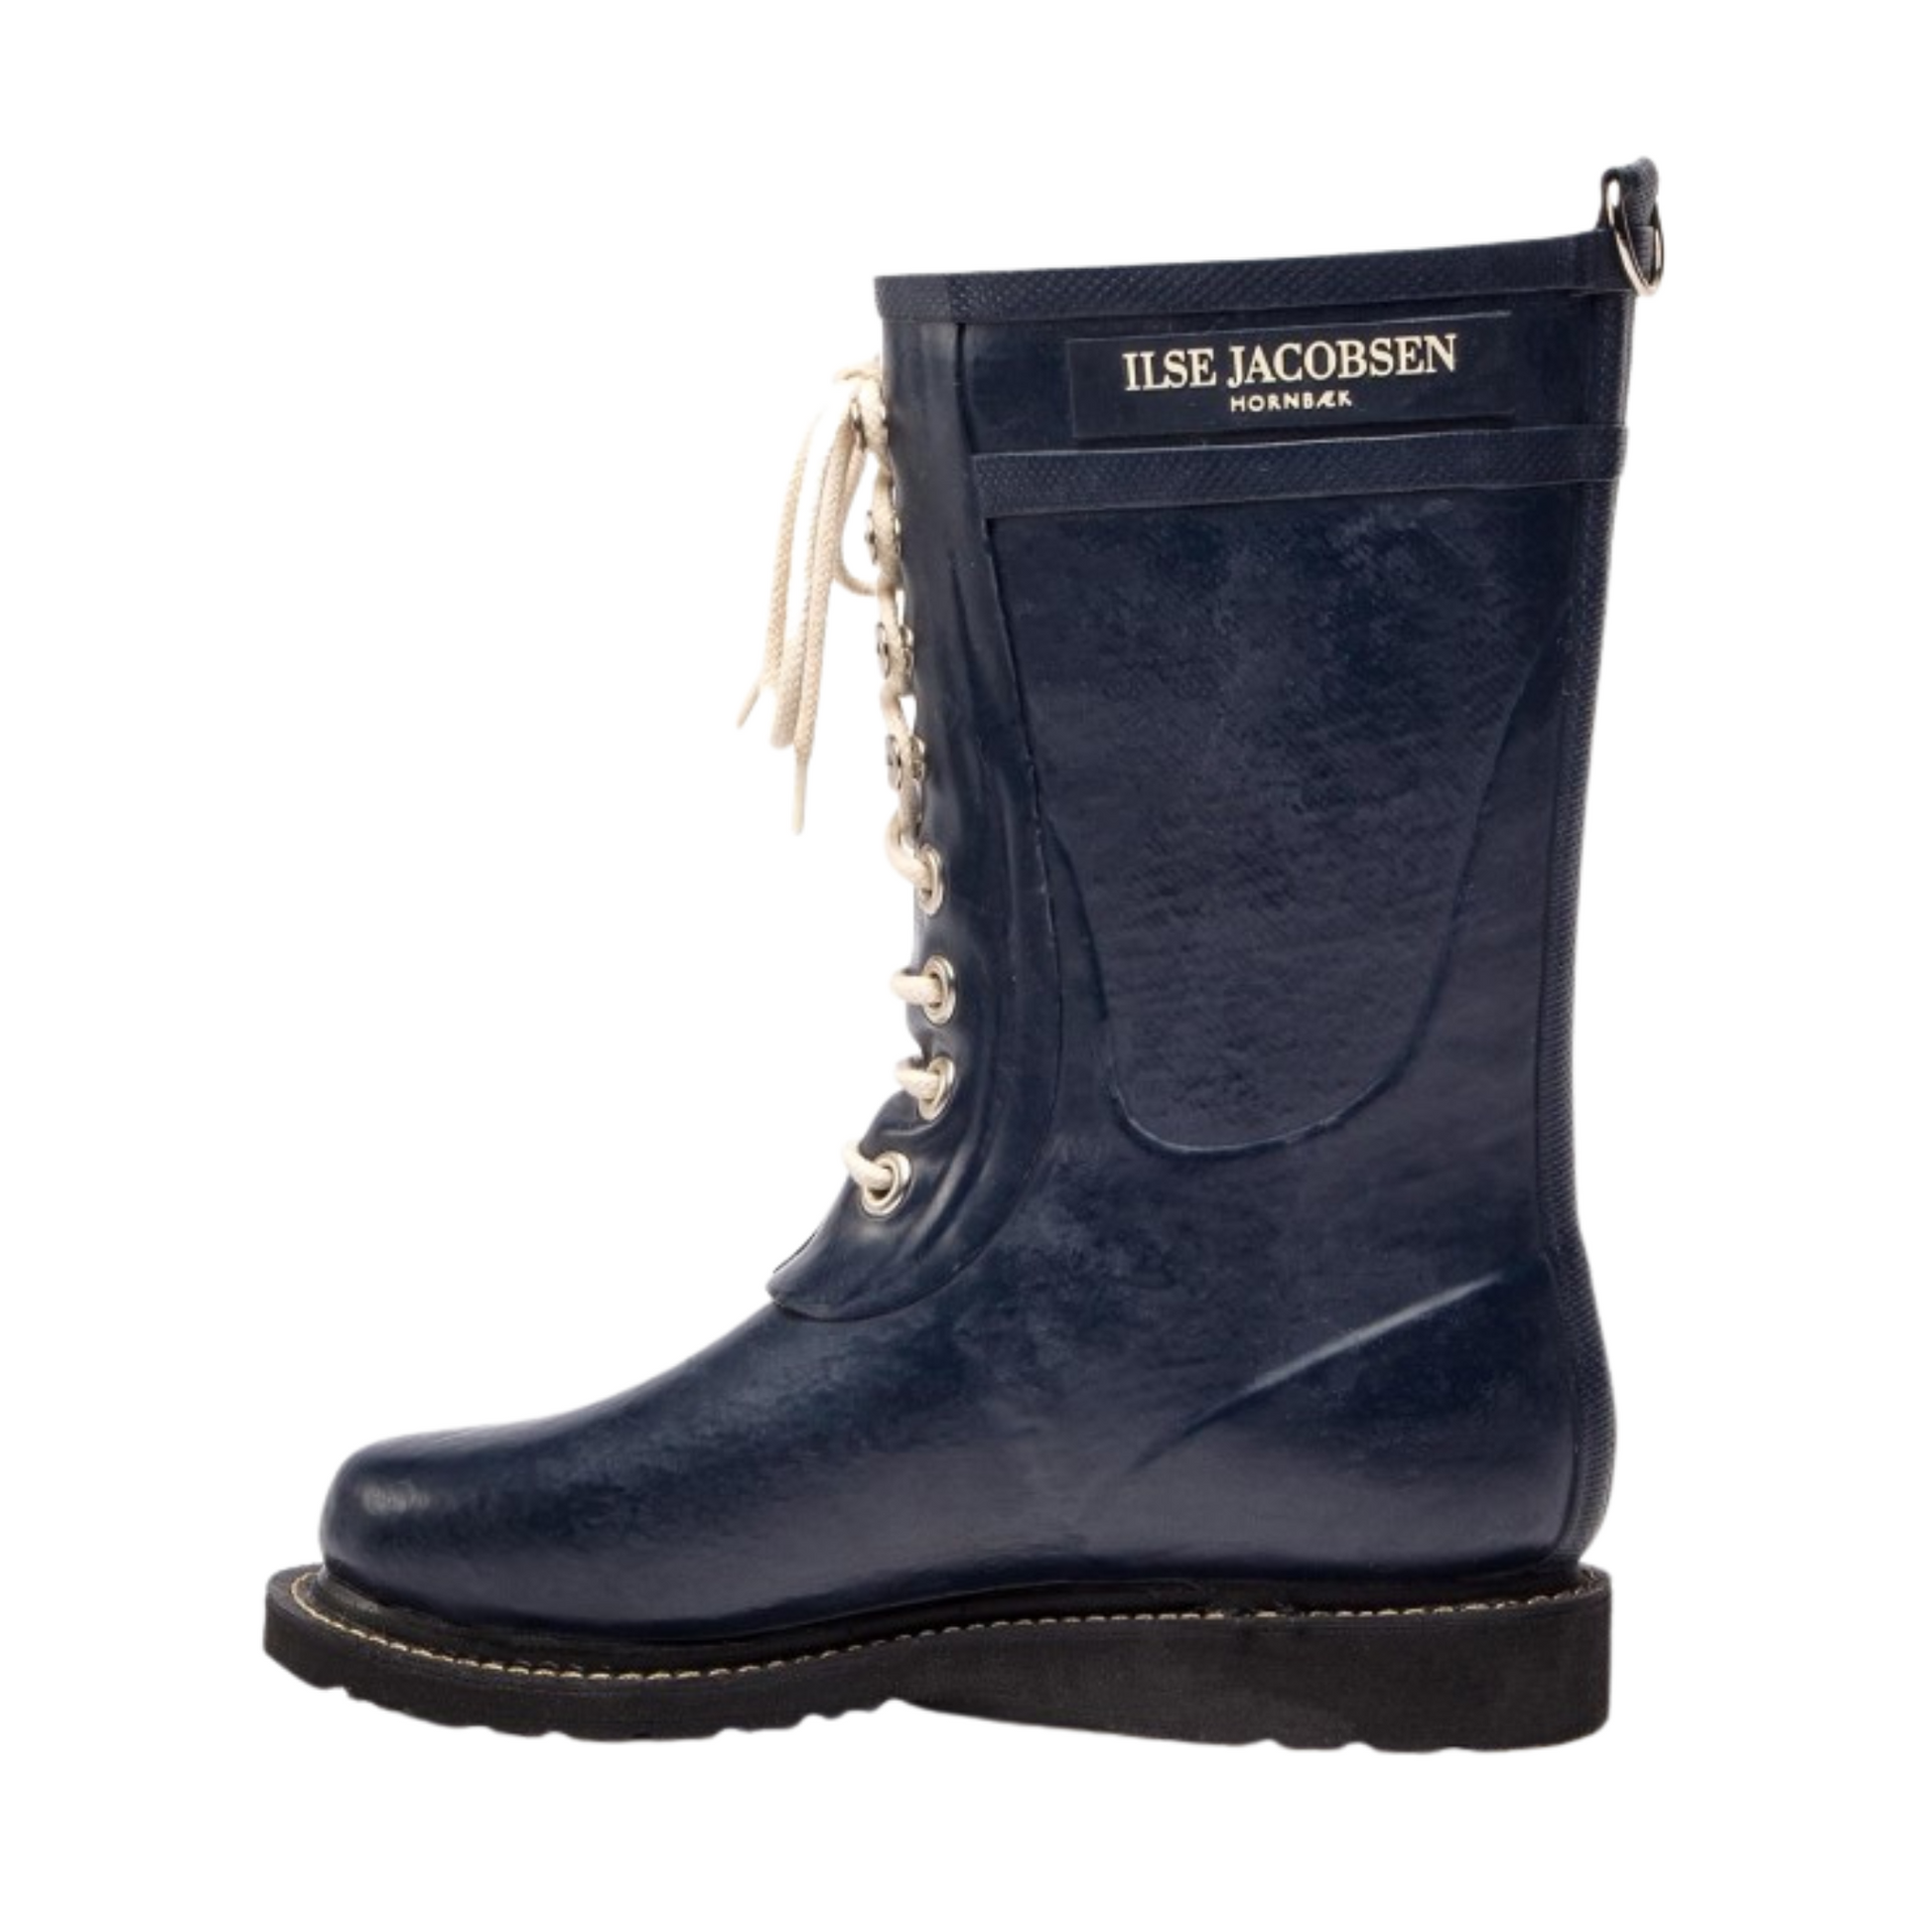 A left side view of a navy rubber boot with white laces.